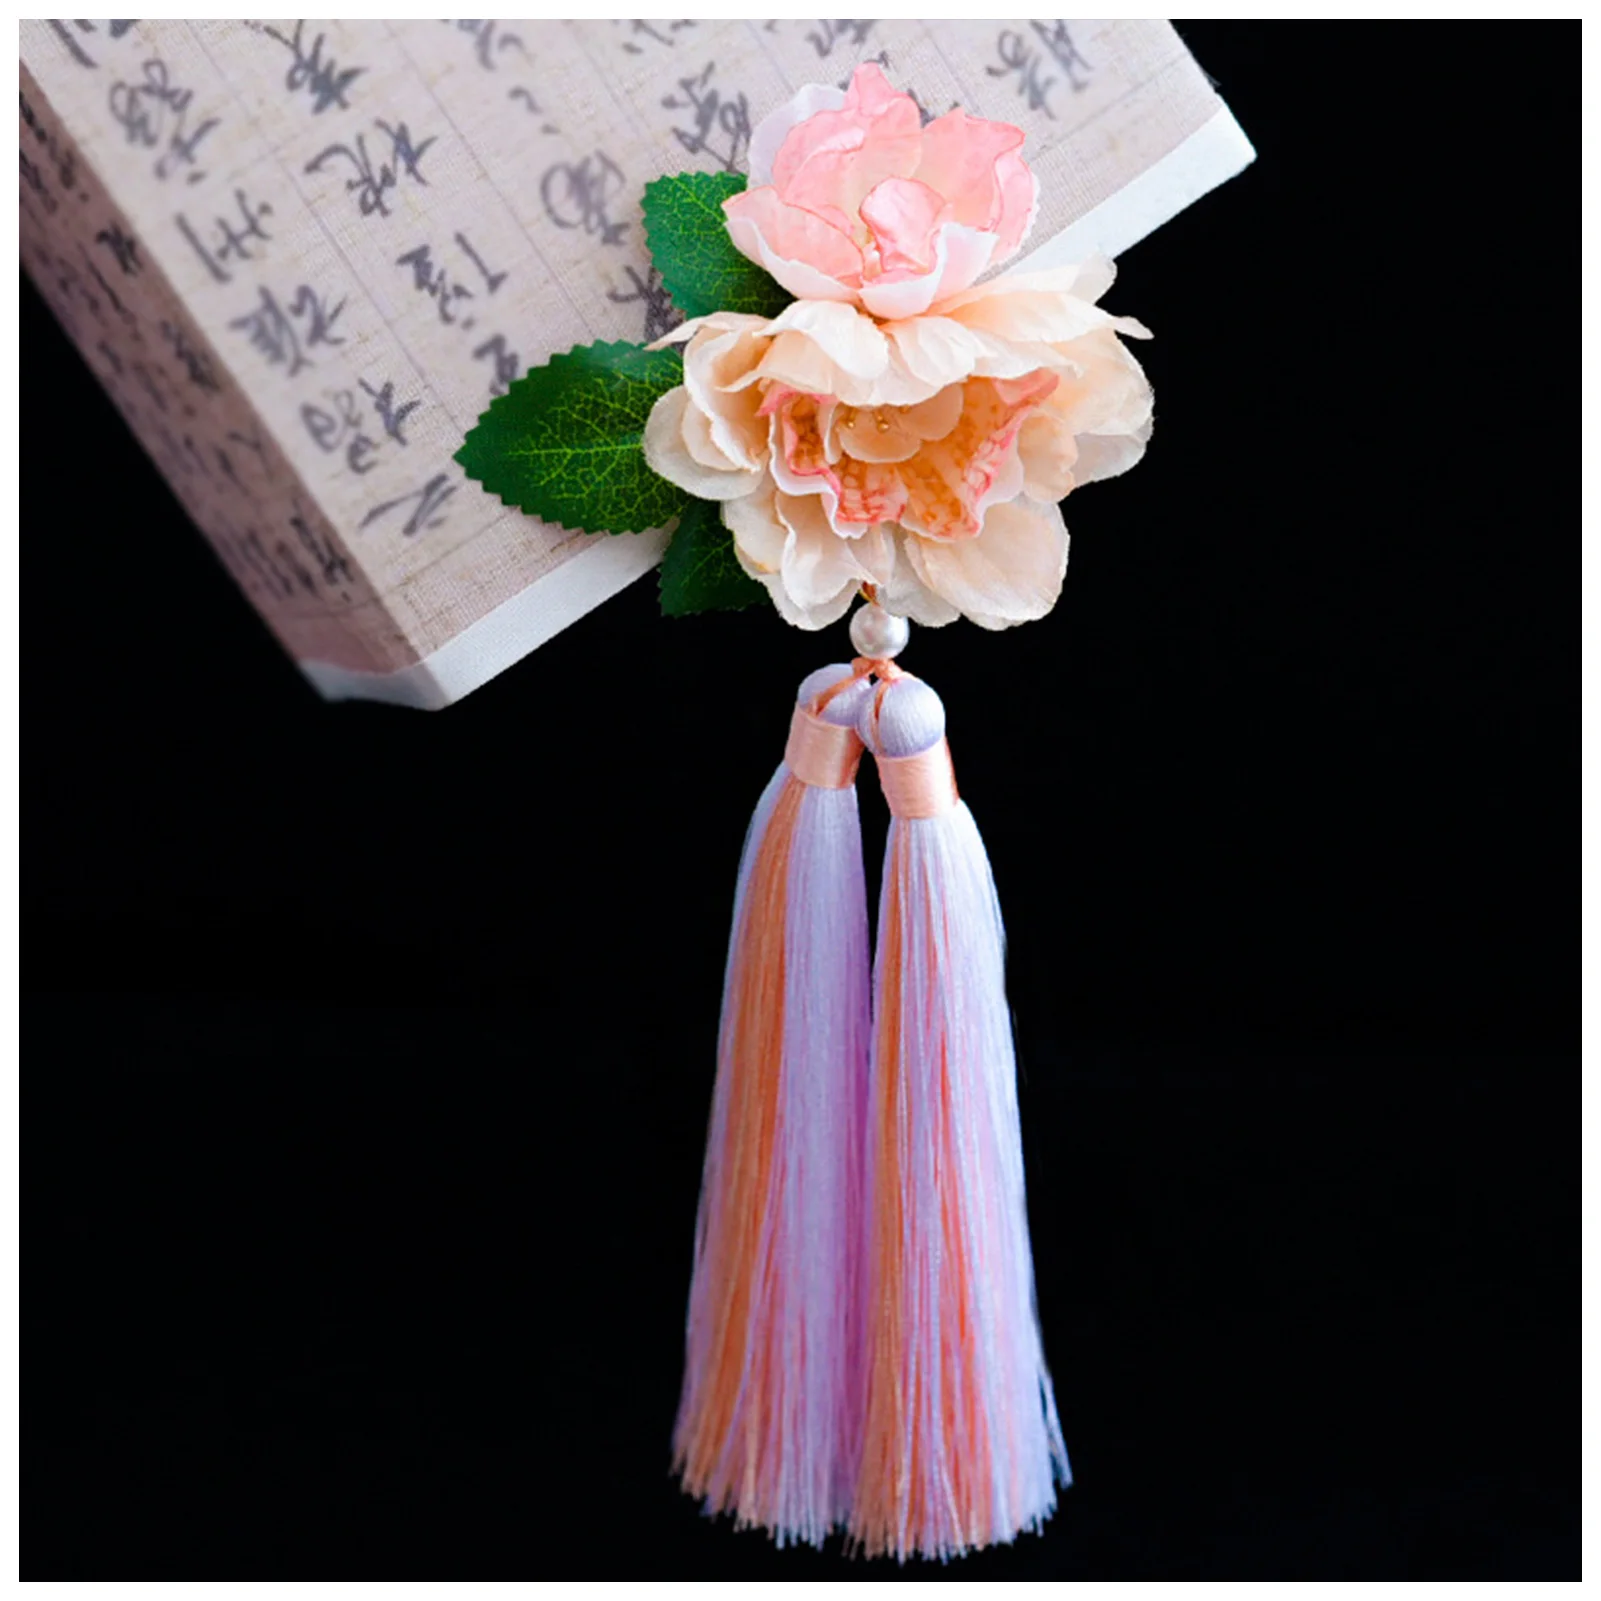 

Woman's Hanfu Side Hair Clips Set Stable Grip Vintage Silk Flower Headpiece with Tassels for Gown Dress Hairstyle Making Tools